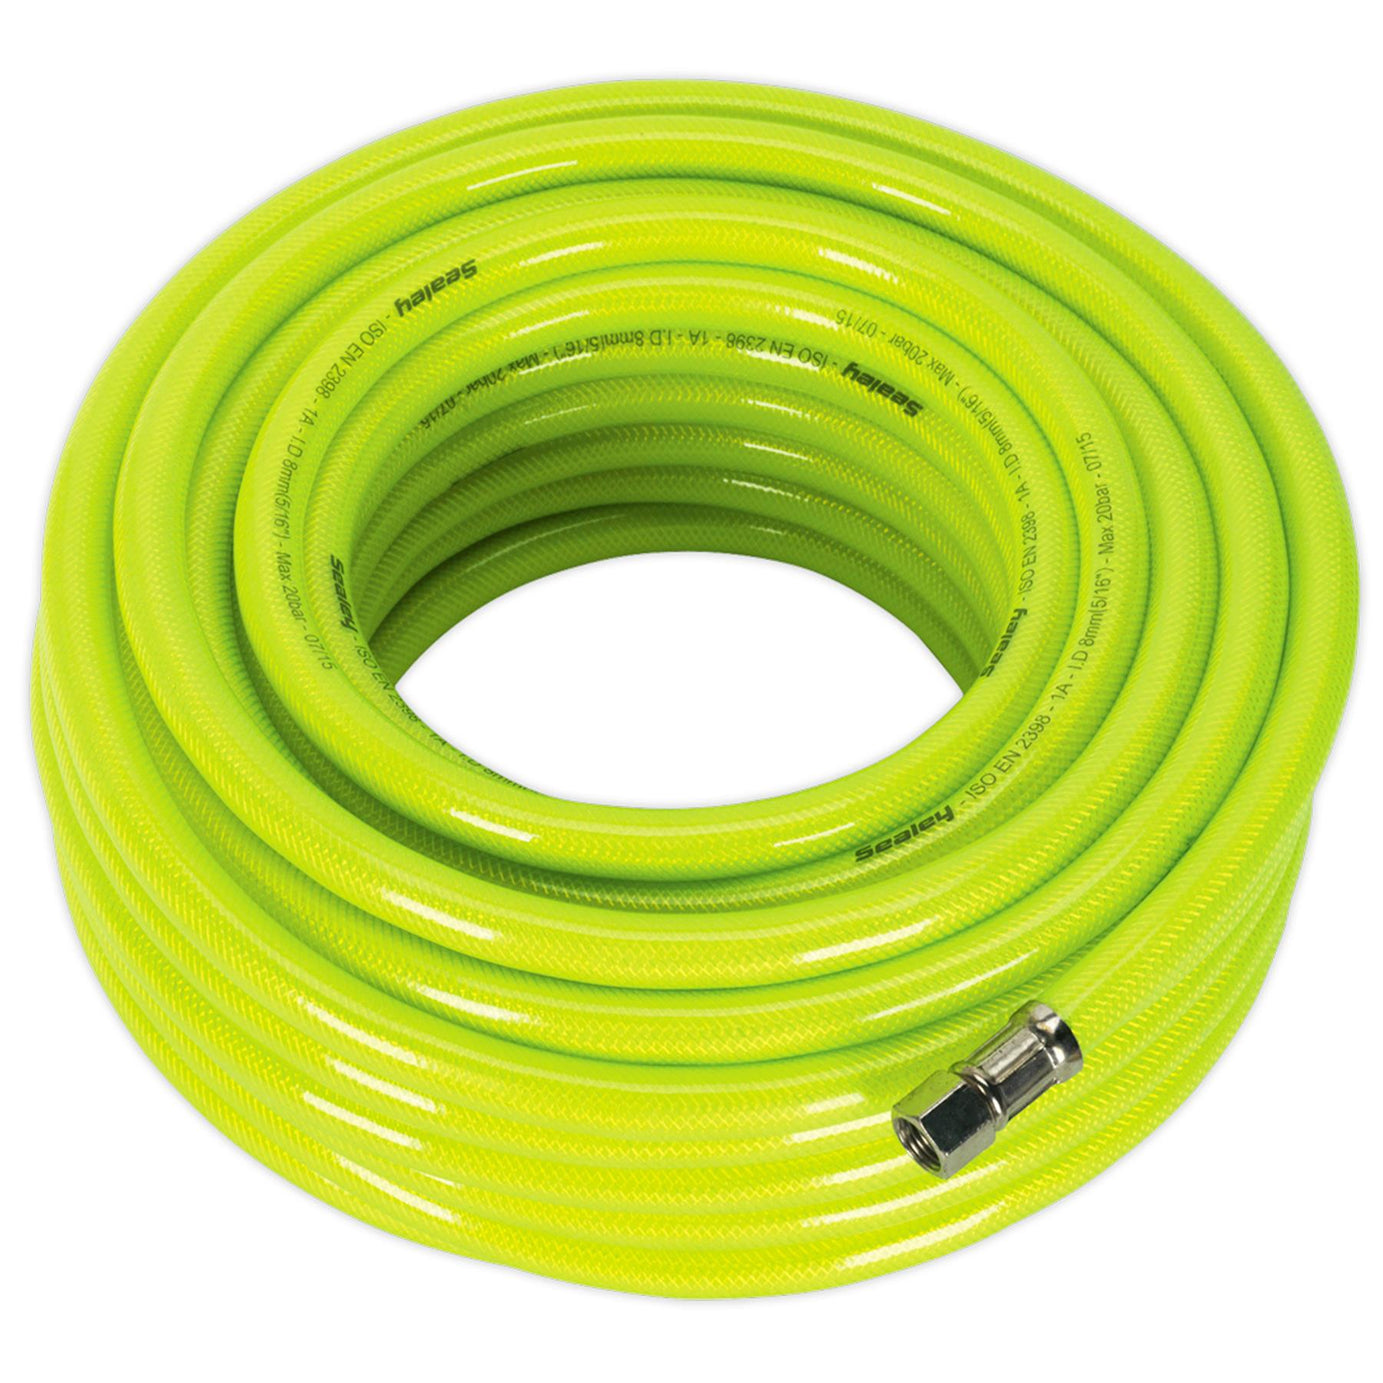 Air Hose High-Visibility 20m x 8mm with 1/4"BSP Unions. Sealey